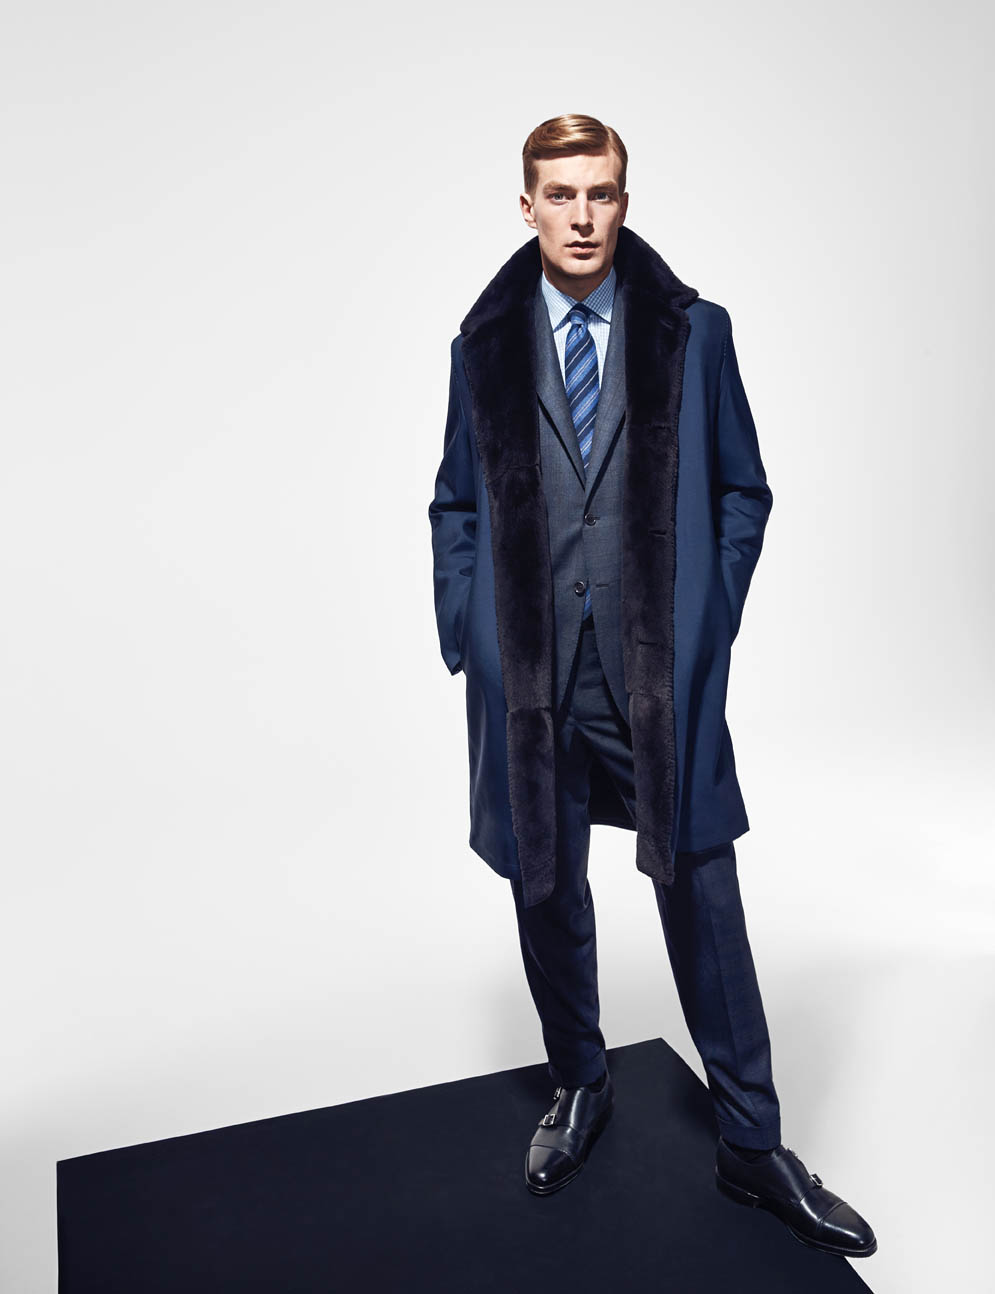 Bergdorf Goodman Takes Elegant Approach to Fall Suiting